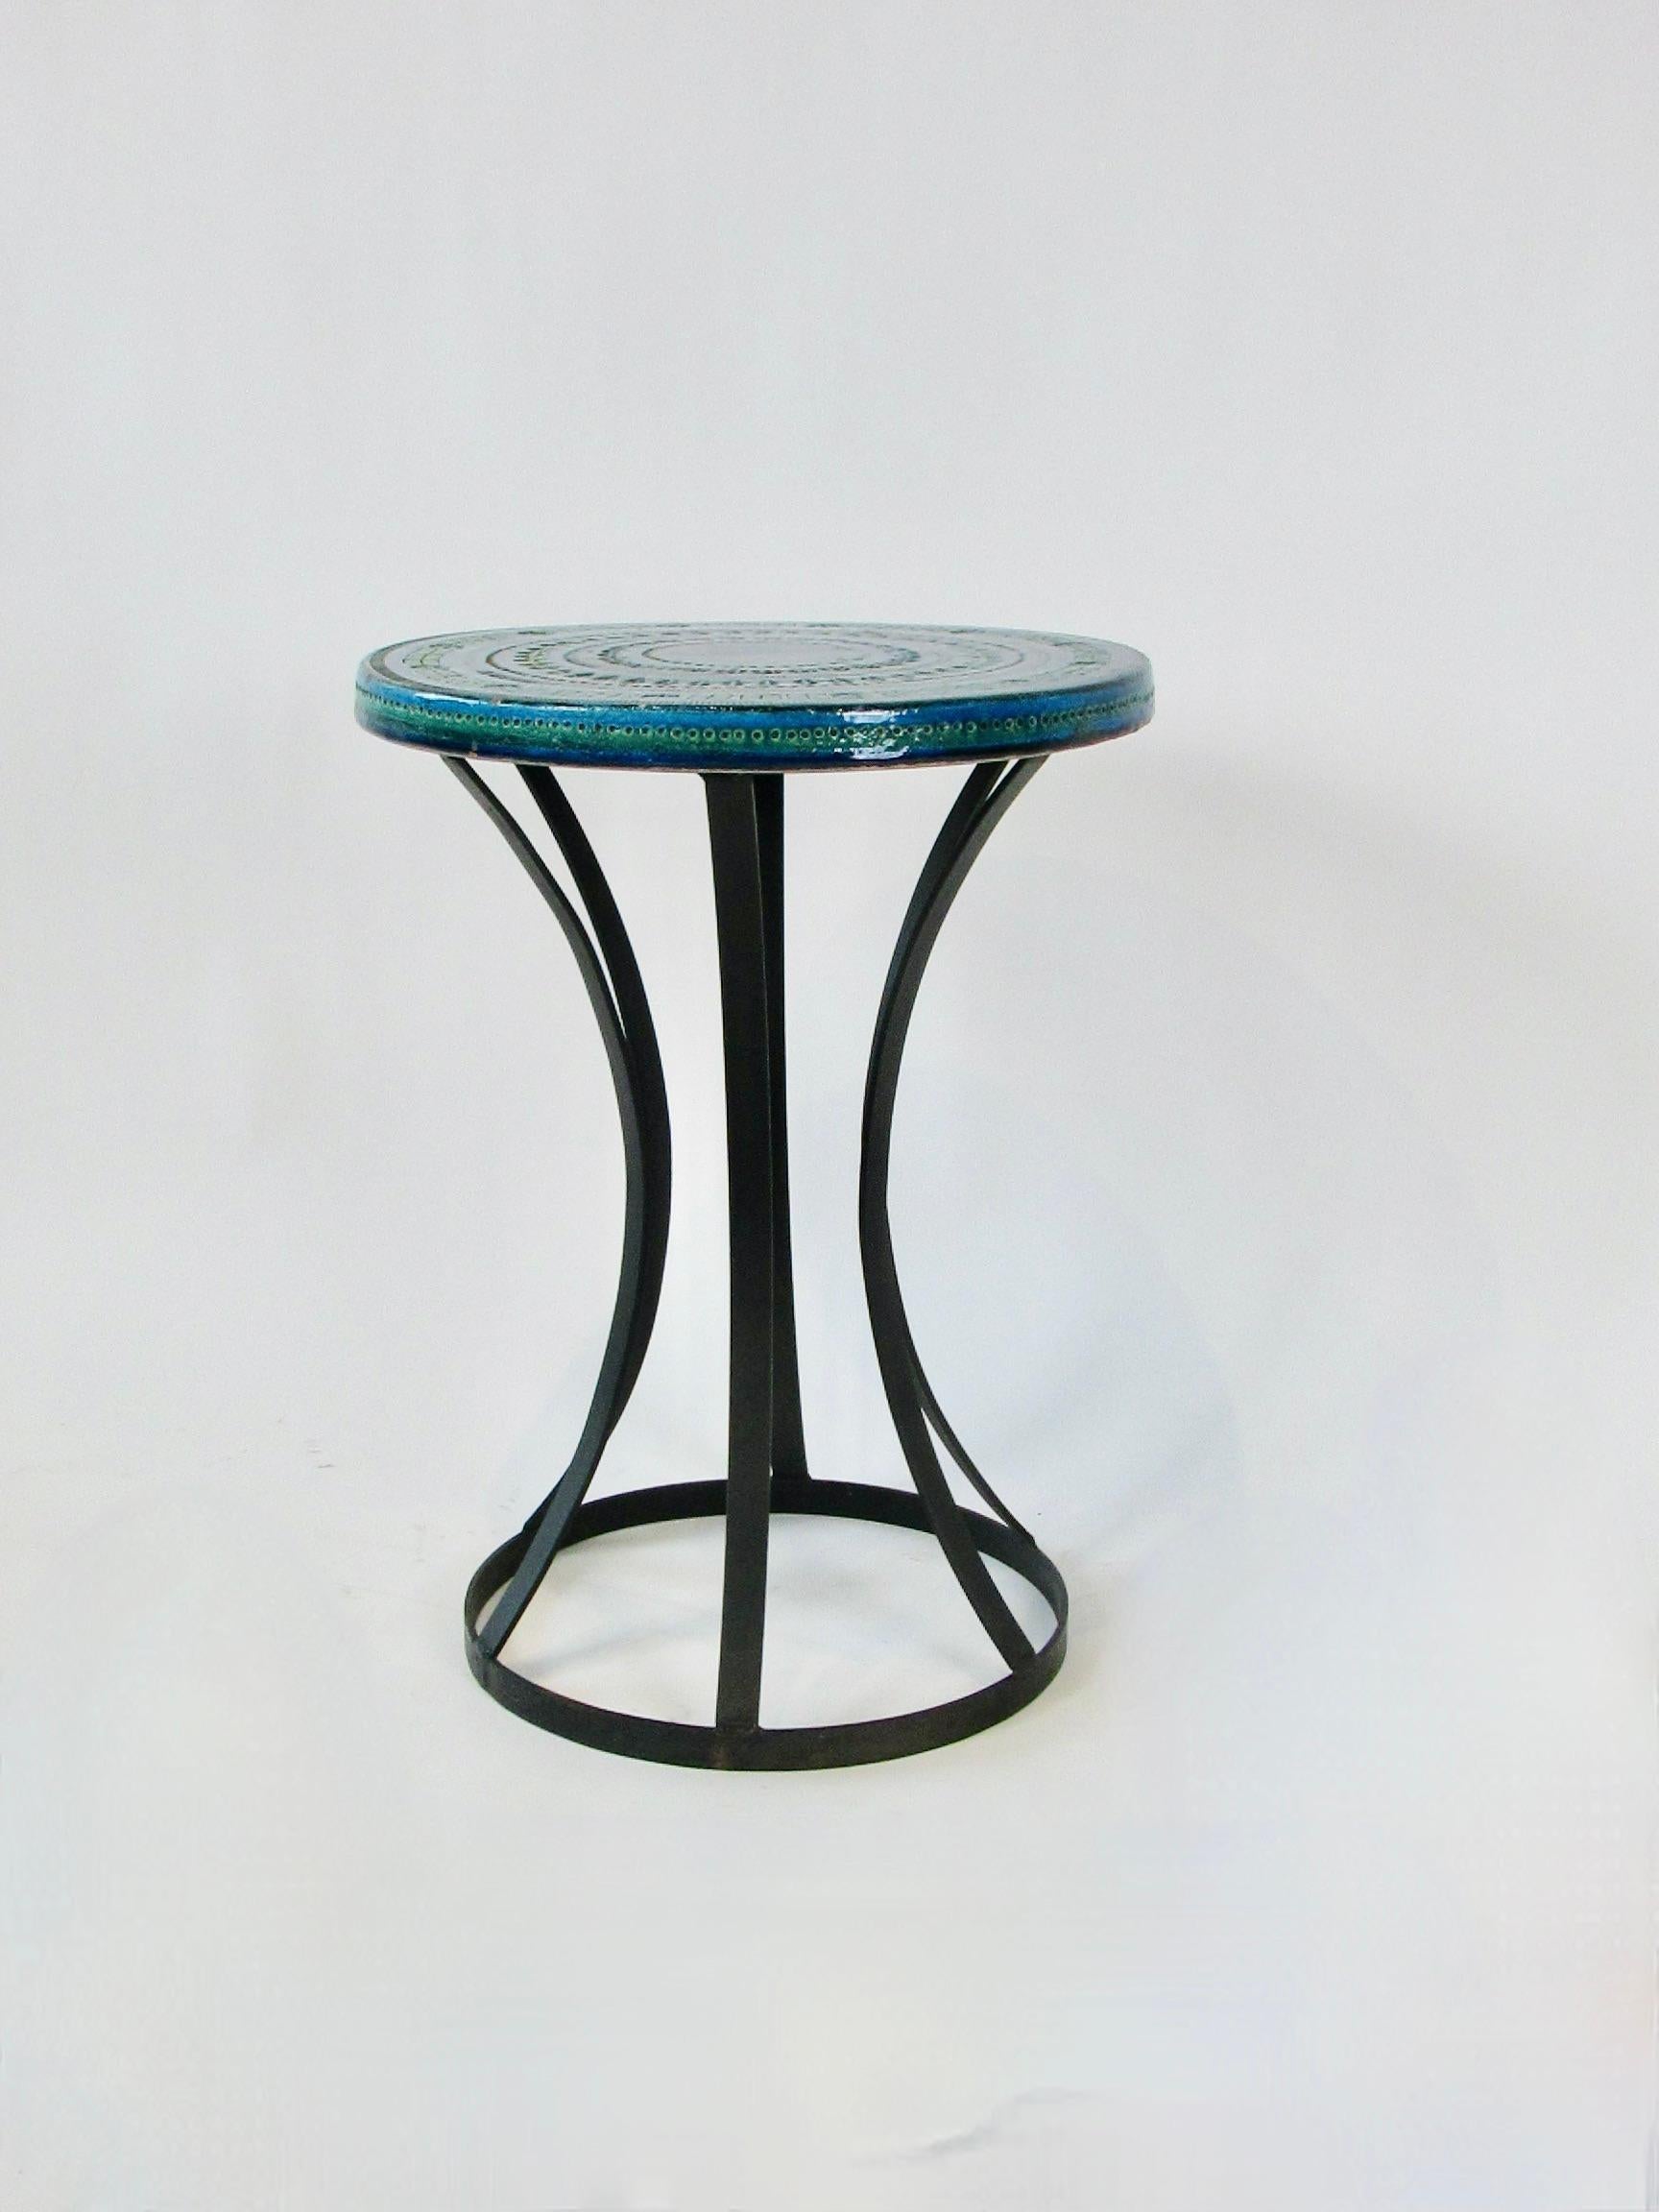 Beautifully blended colors of blues and green fired on Aldo Londi designed pottery table. Pattern is incised into table top. Top sits on flat band wrought iron hourglass base. Imported from Italy by Raymor co.